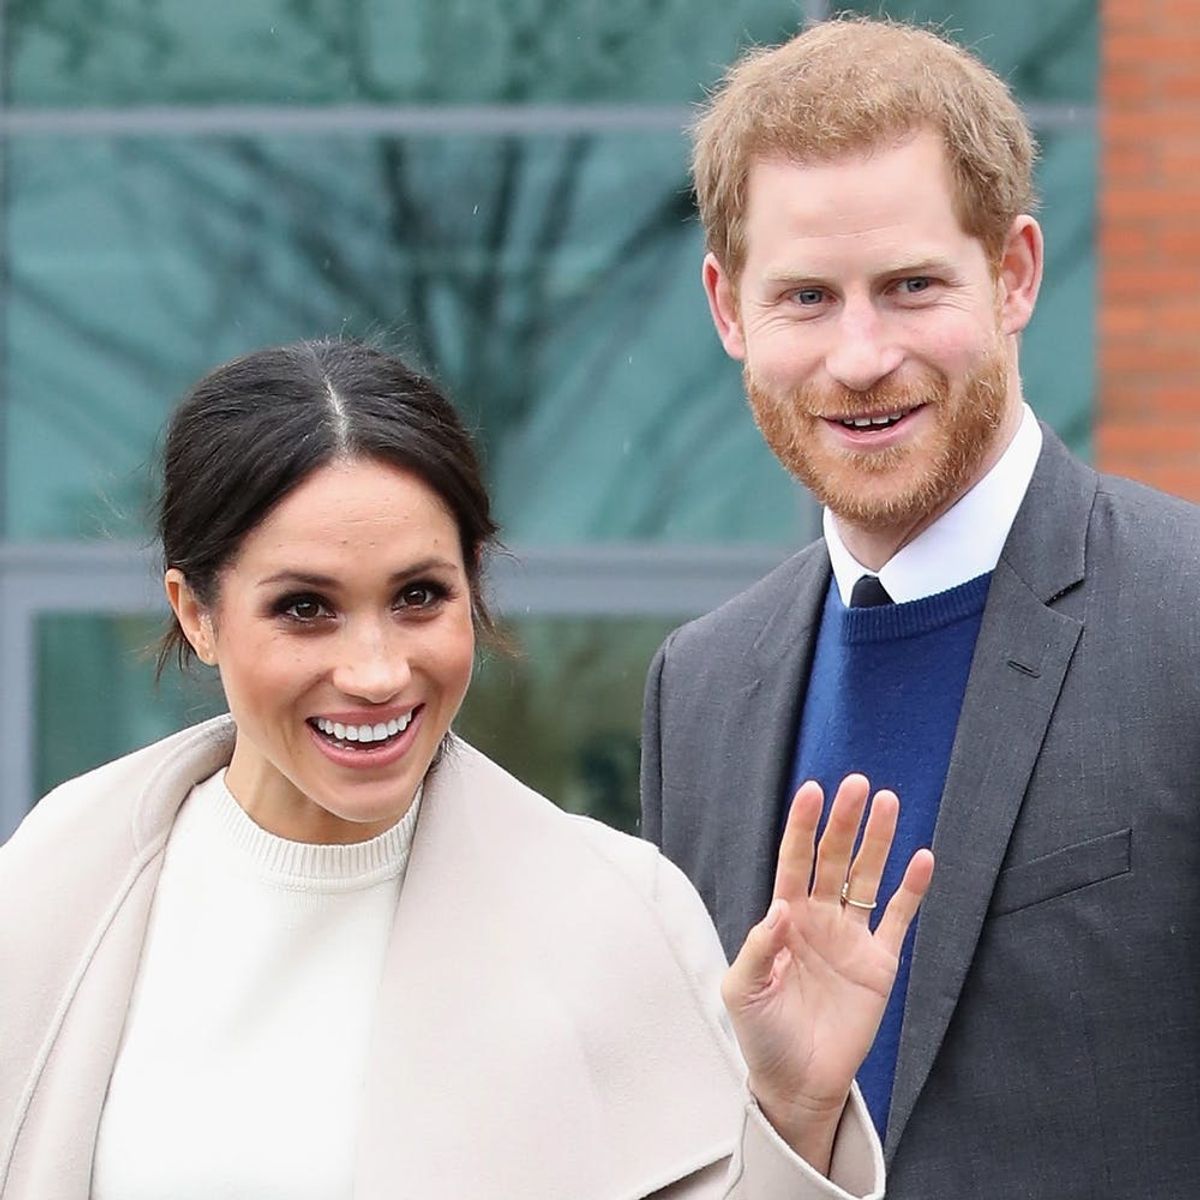 Prince Harry Just Gave the Sweetest Shout-Out to Meghan Markle in a Speech